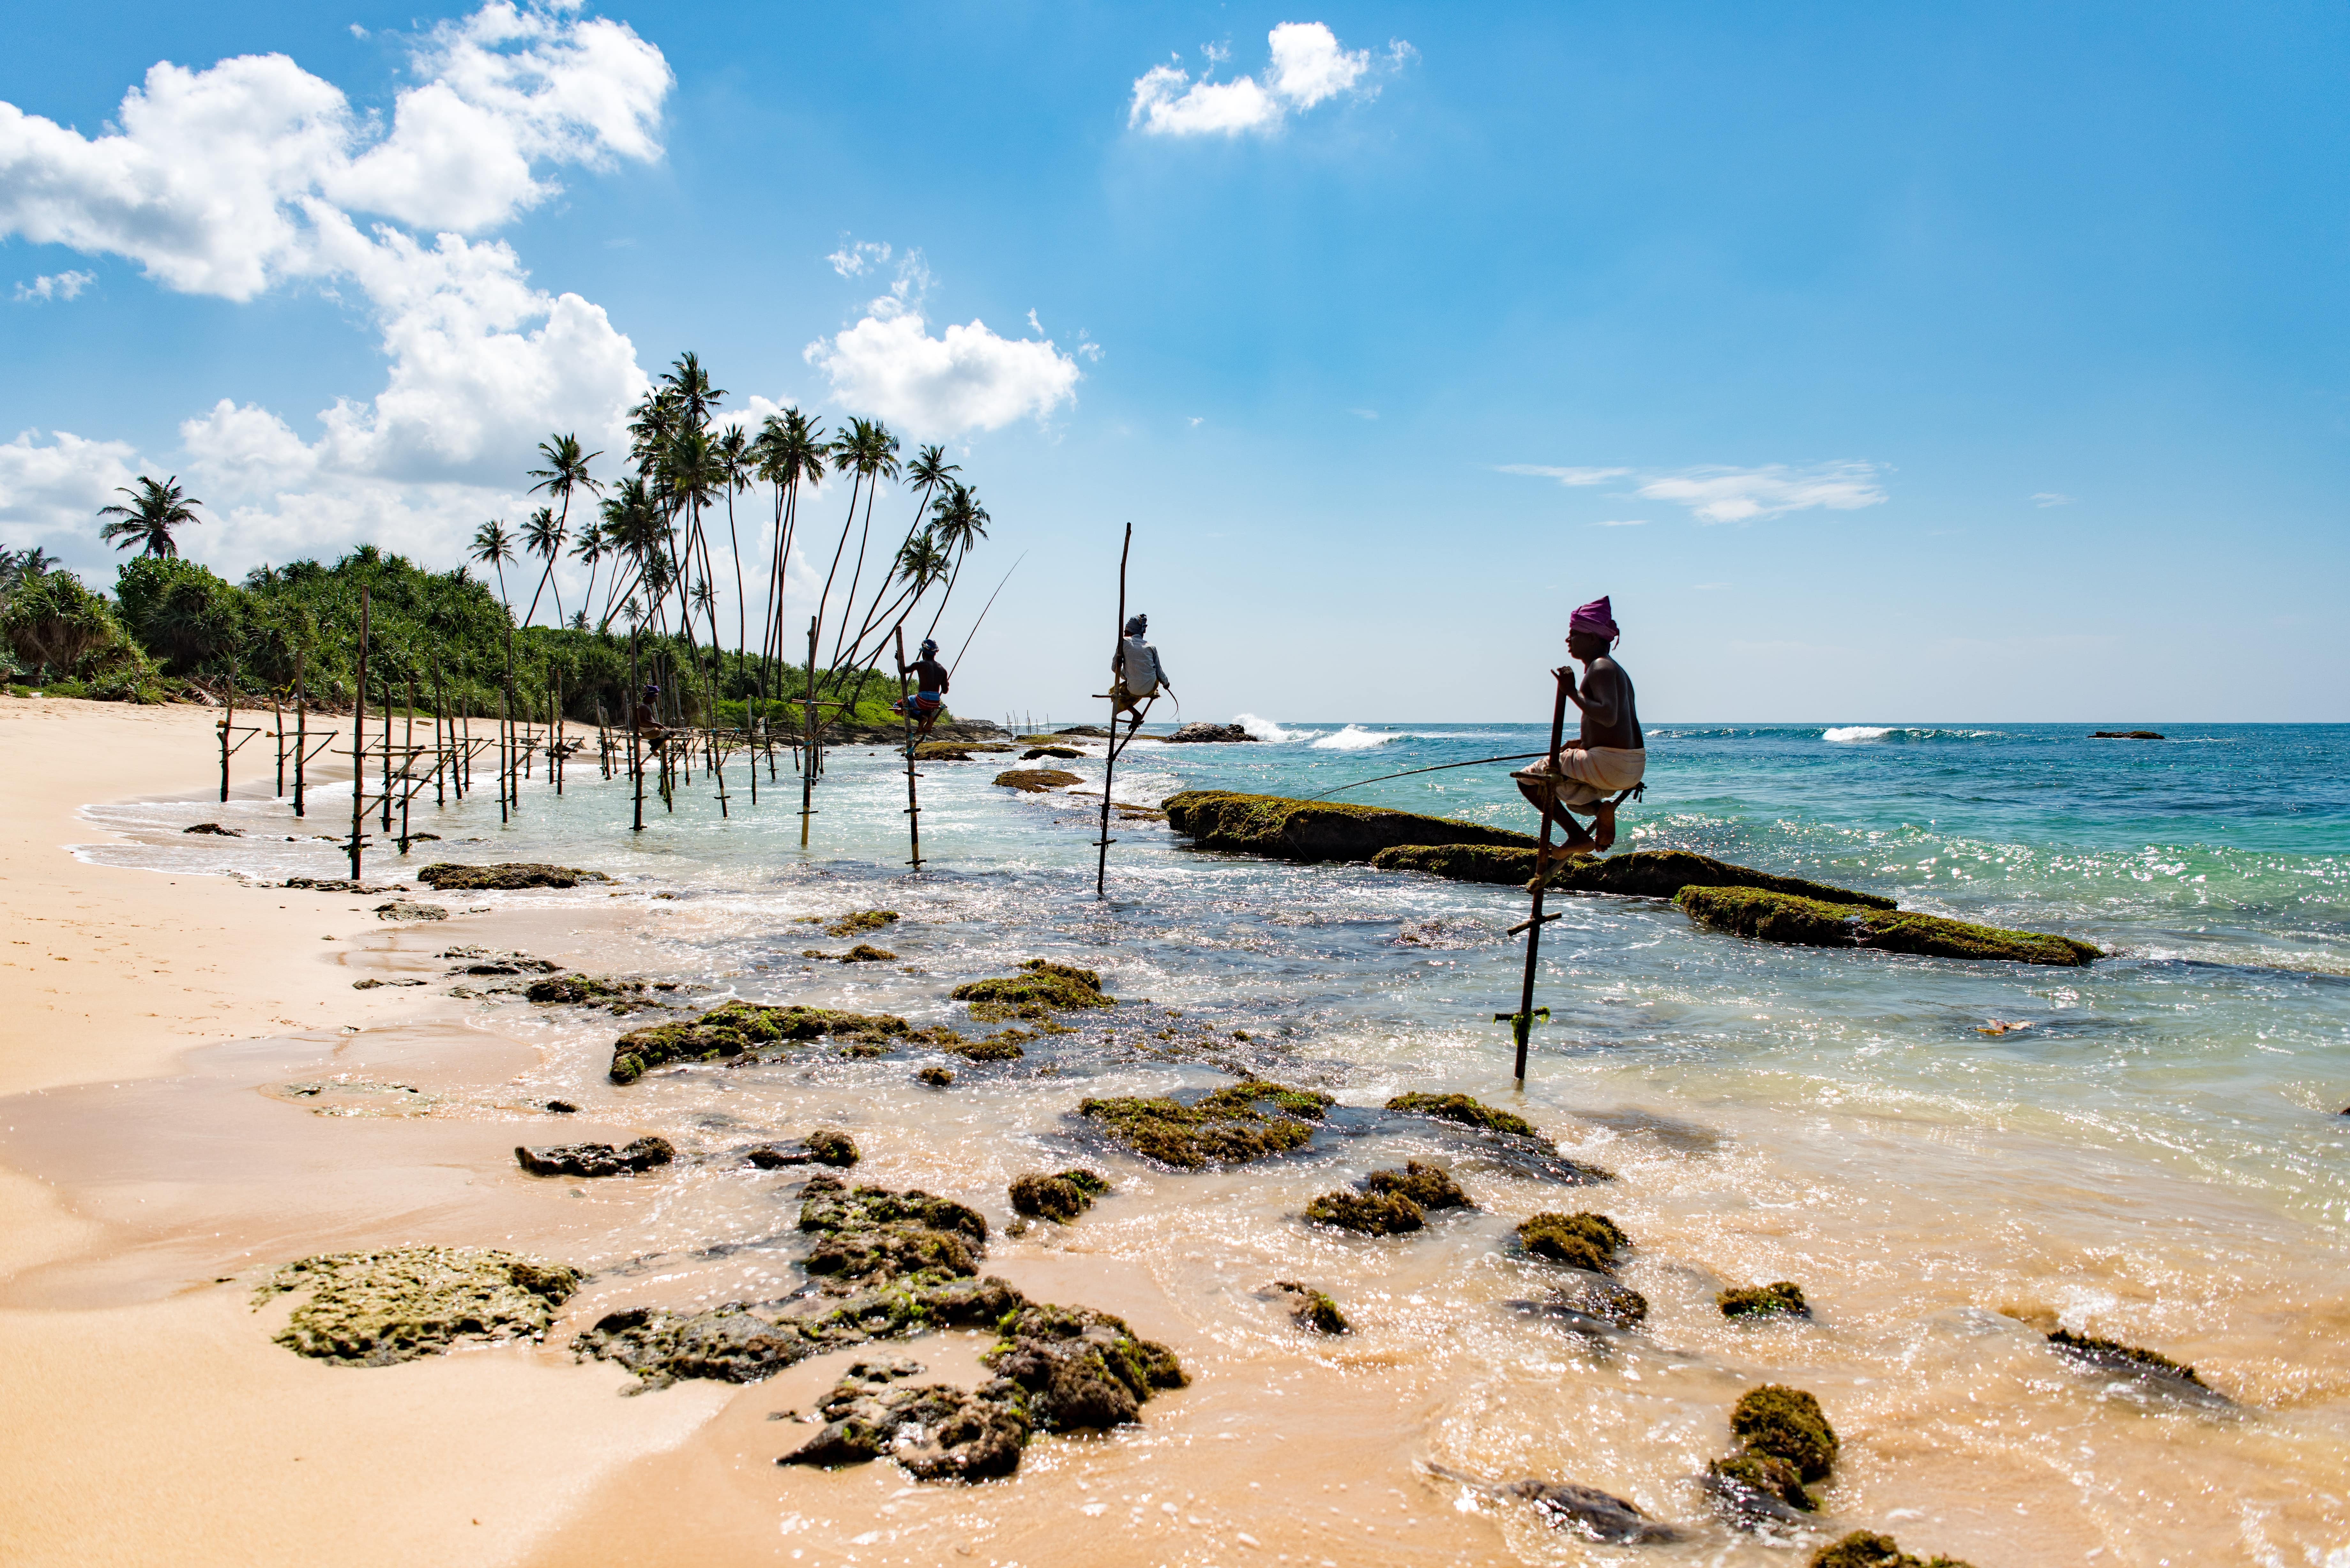 Sun, sand and stunning sights: Your guide to Sri Lanka's best